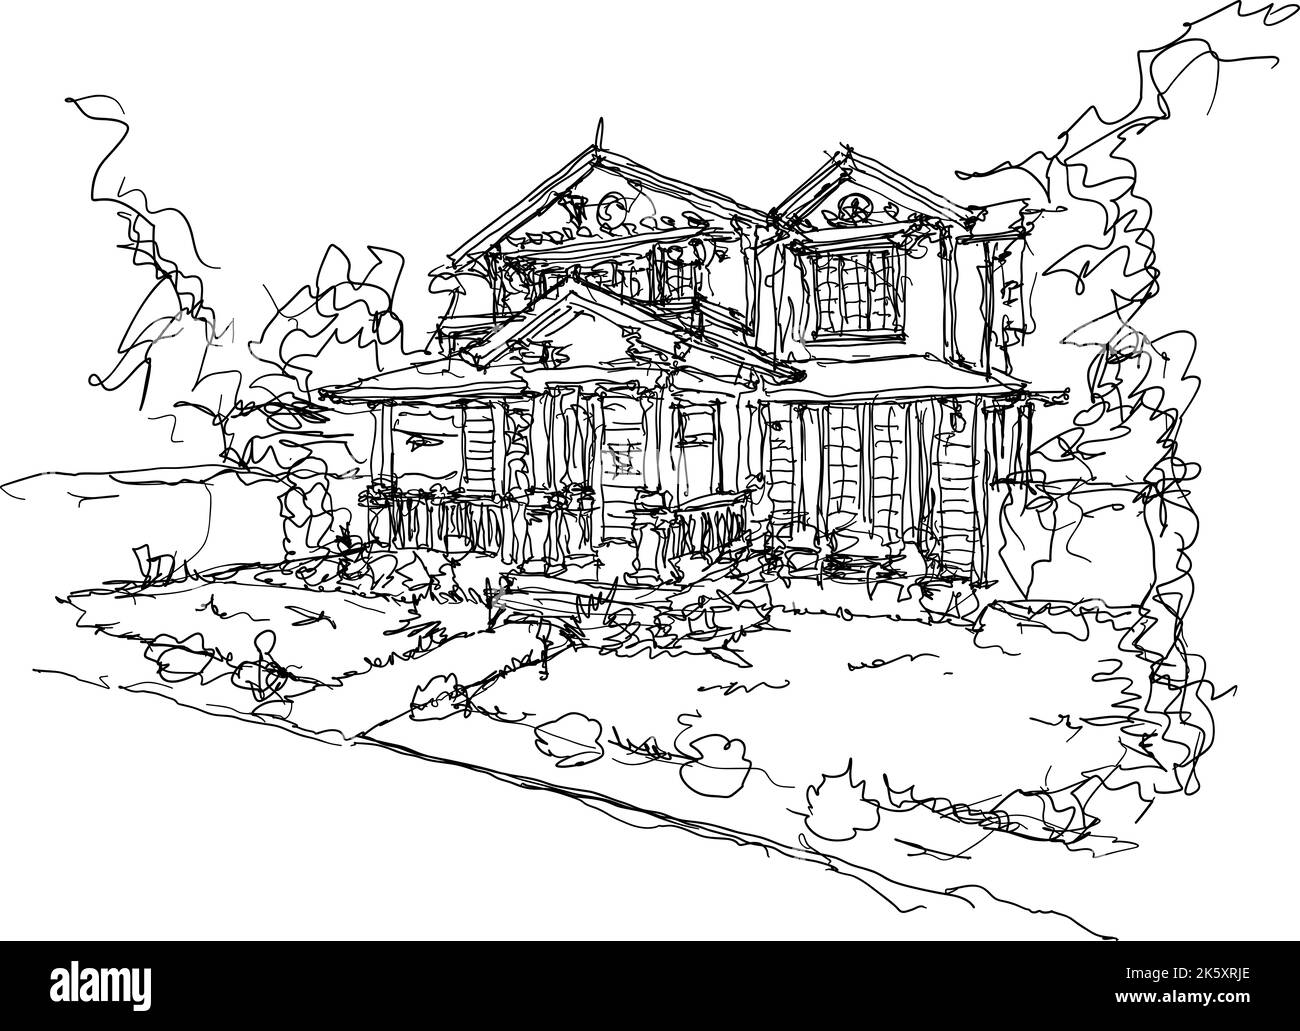 hand drawn architectural sketch of beautiful classic detached village house with garden  and trees Stock Photo